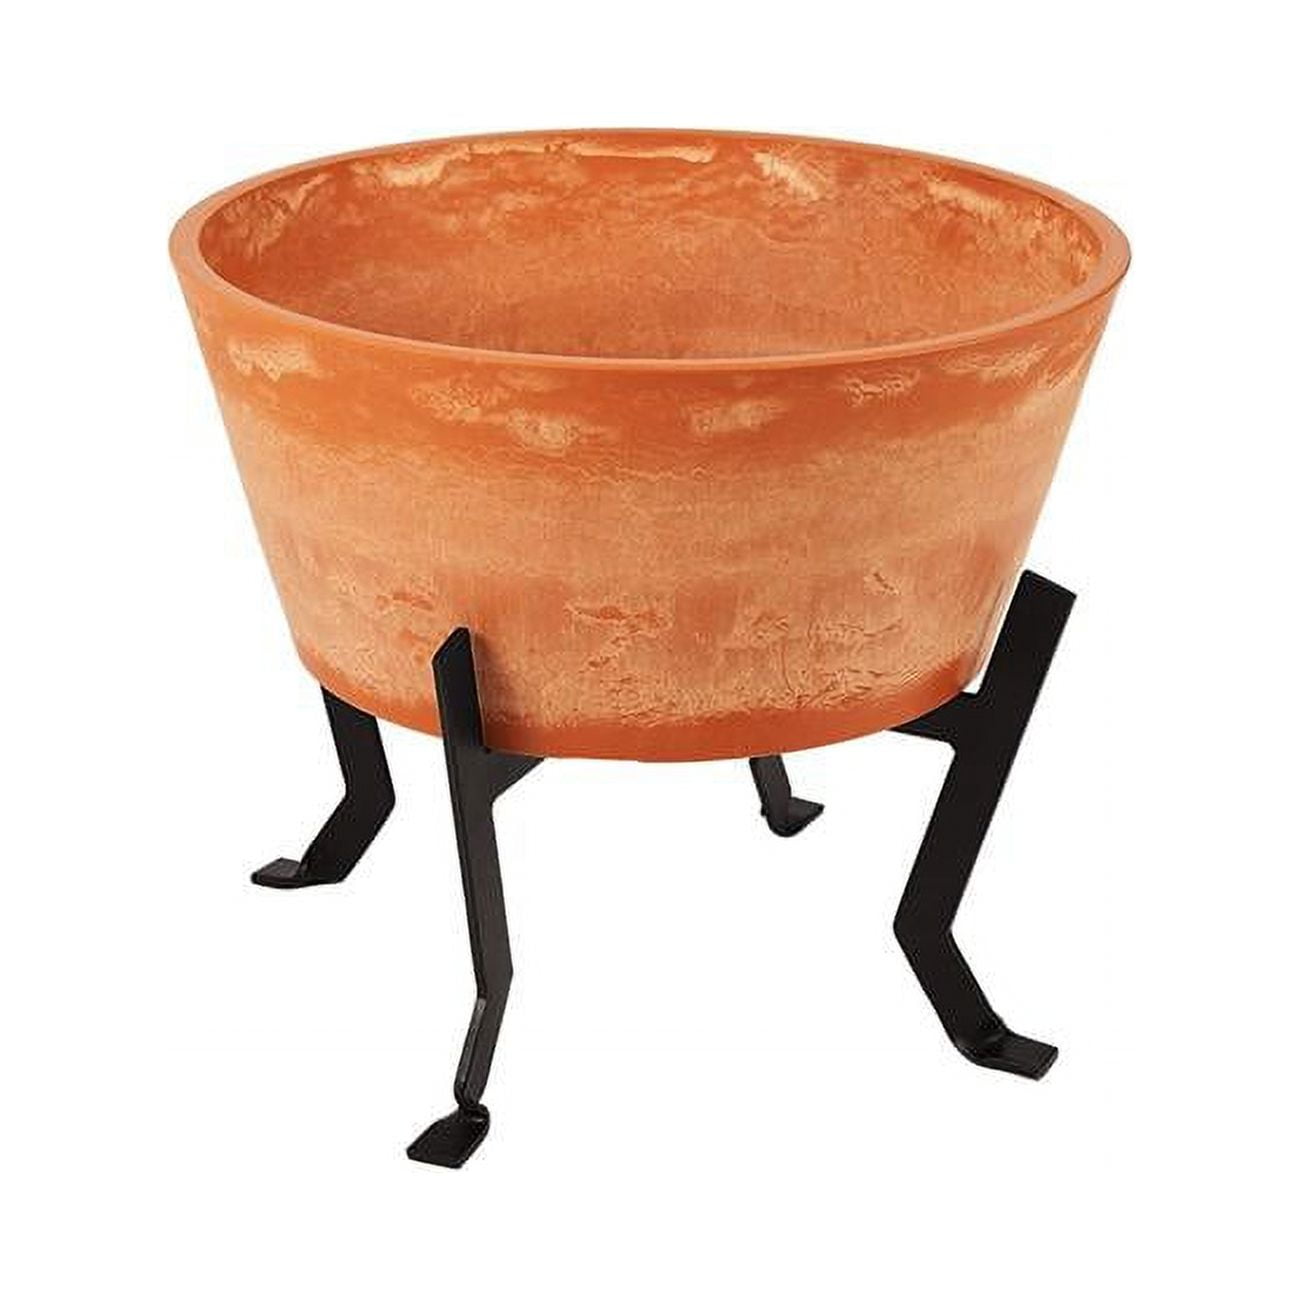 Achla Fb-59 Denise I Plant Stand, Terracotta